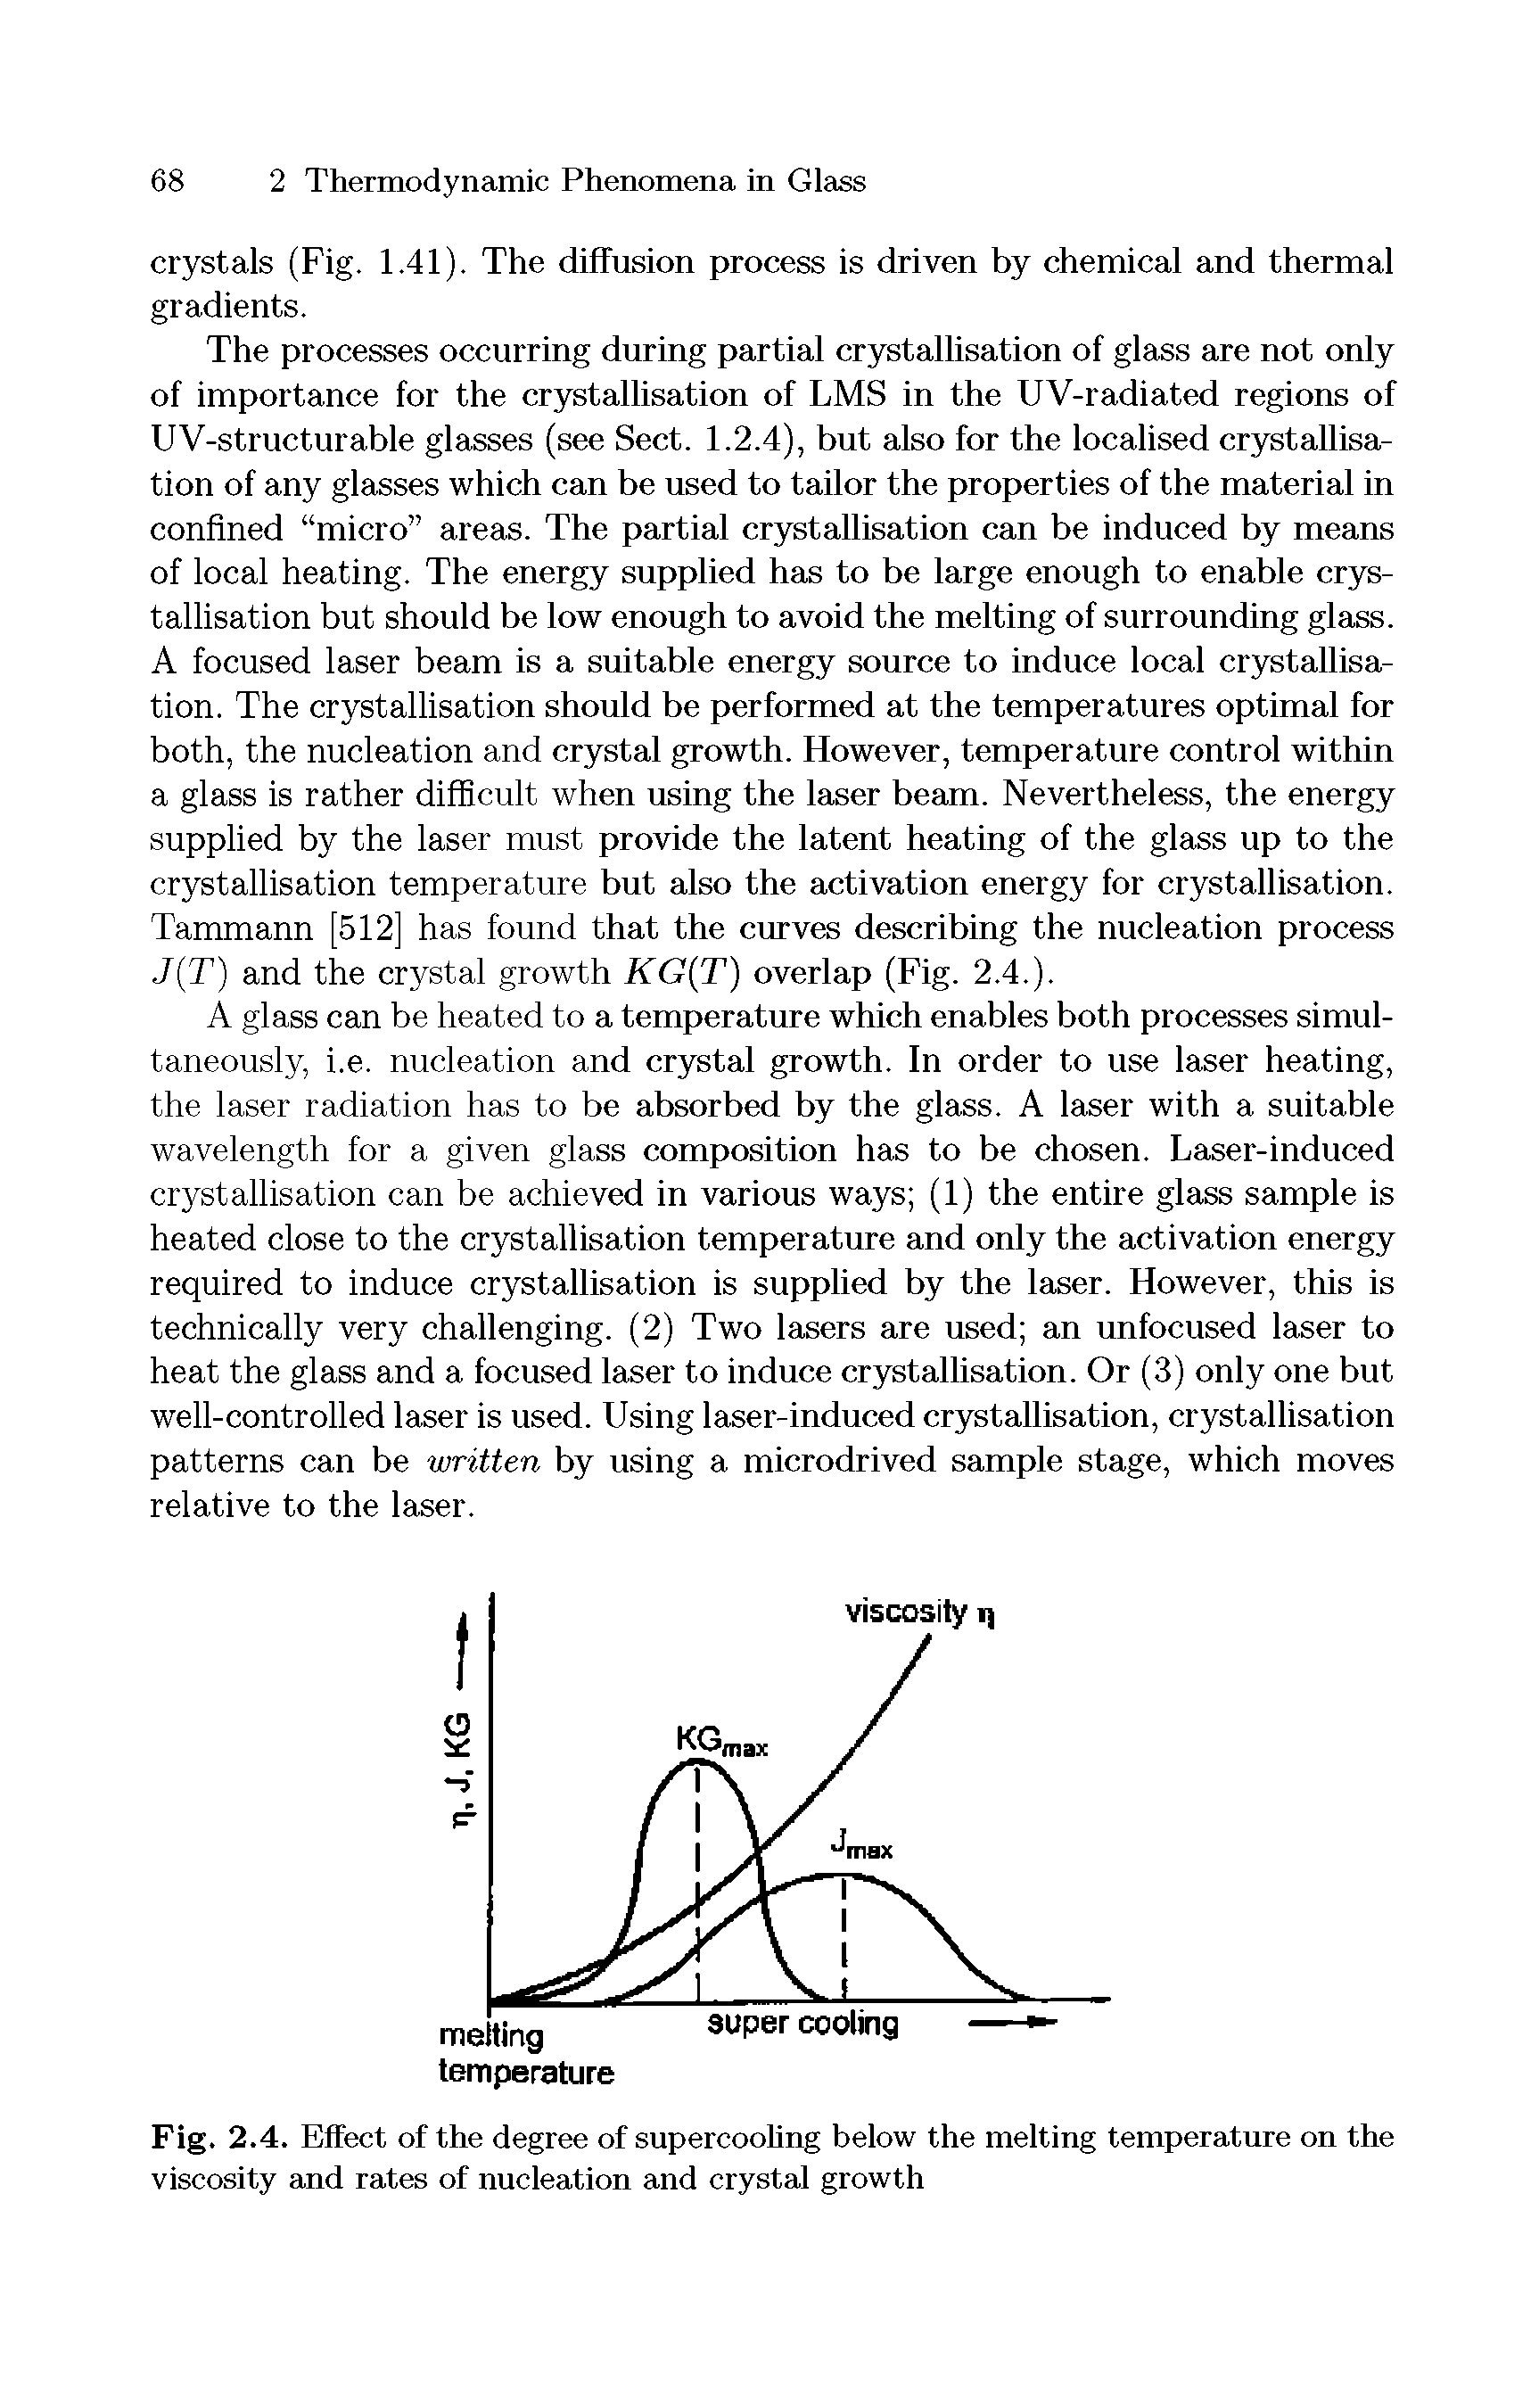 Fig. 2.4. Effect of the degree of supercooling below the melting temperature on the viscosity and rates of nucleation and crystal growth...